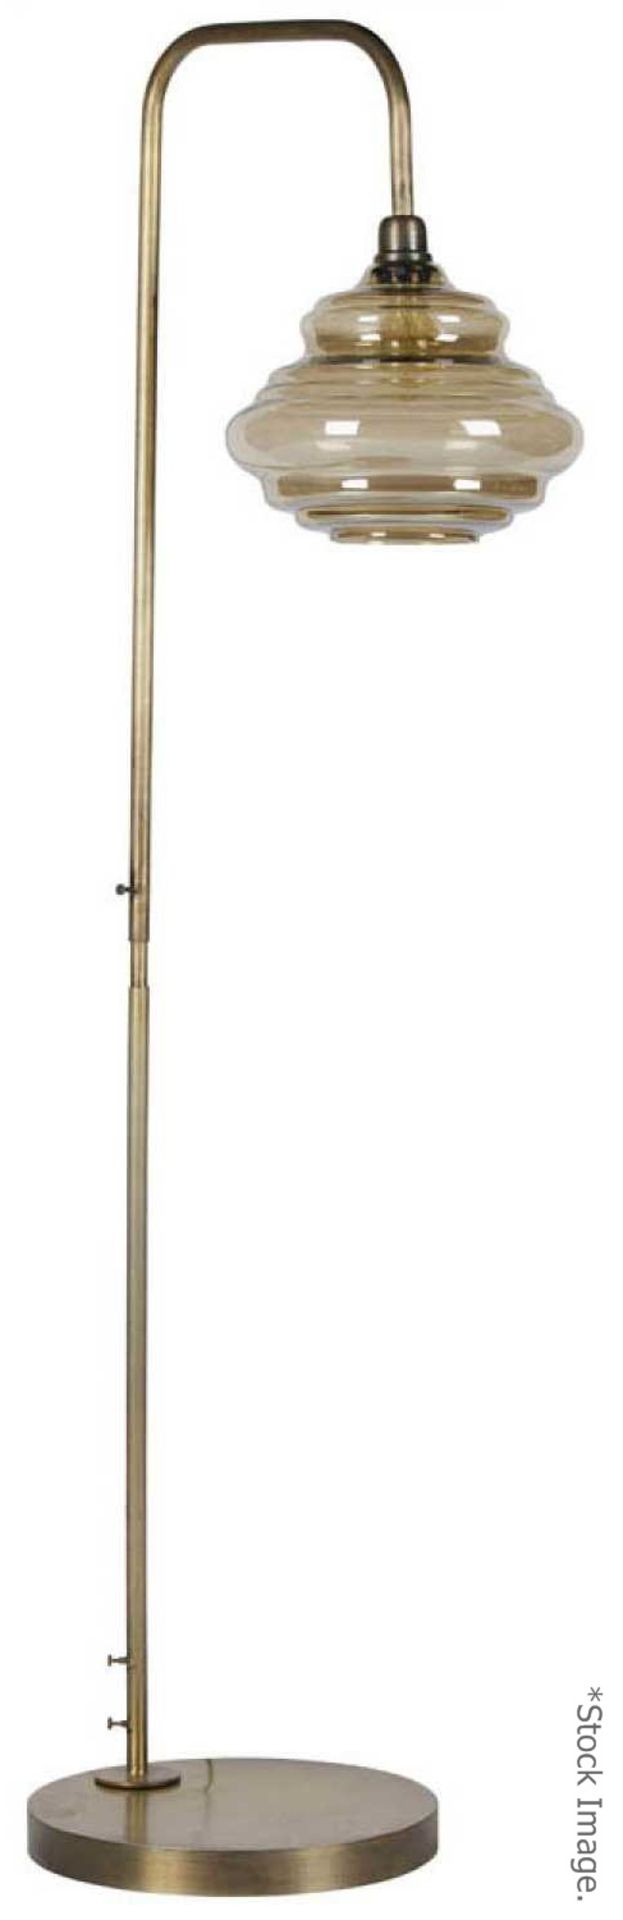 1 x BePureHome 'Obvious' Vintage-Style Floor Lamp With Antique Brass Finish - RRP £299.99